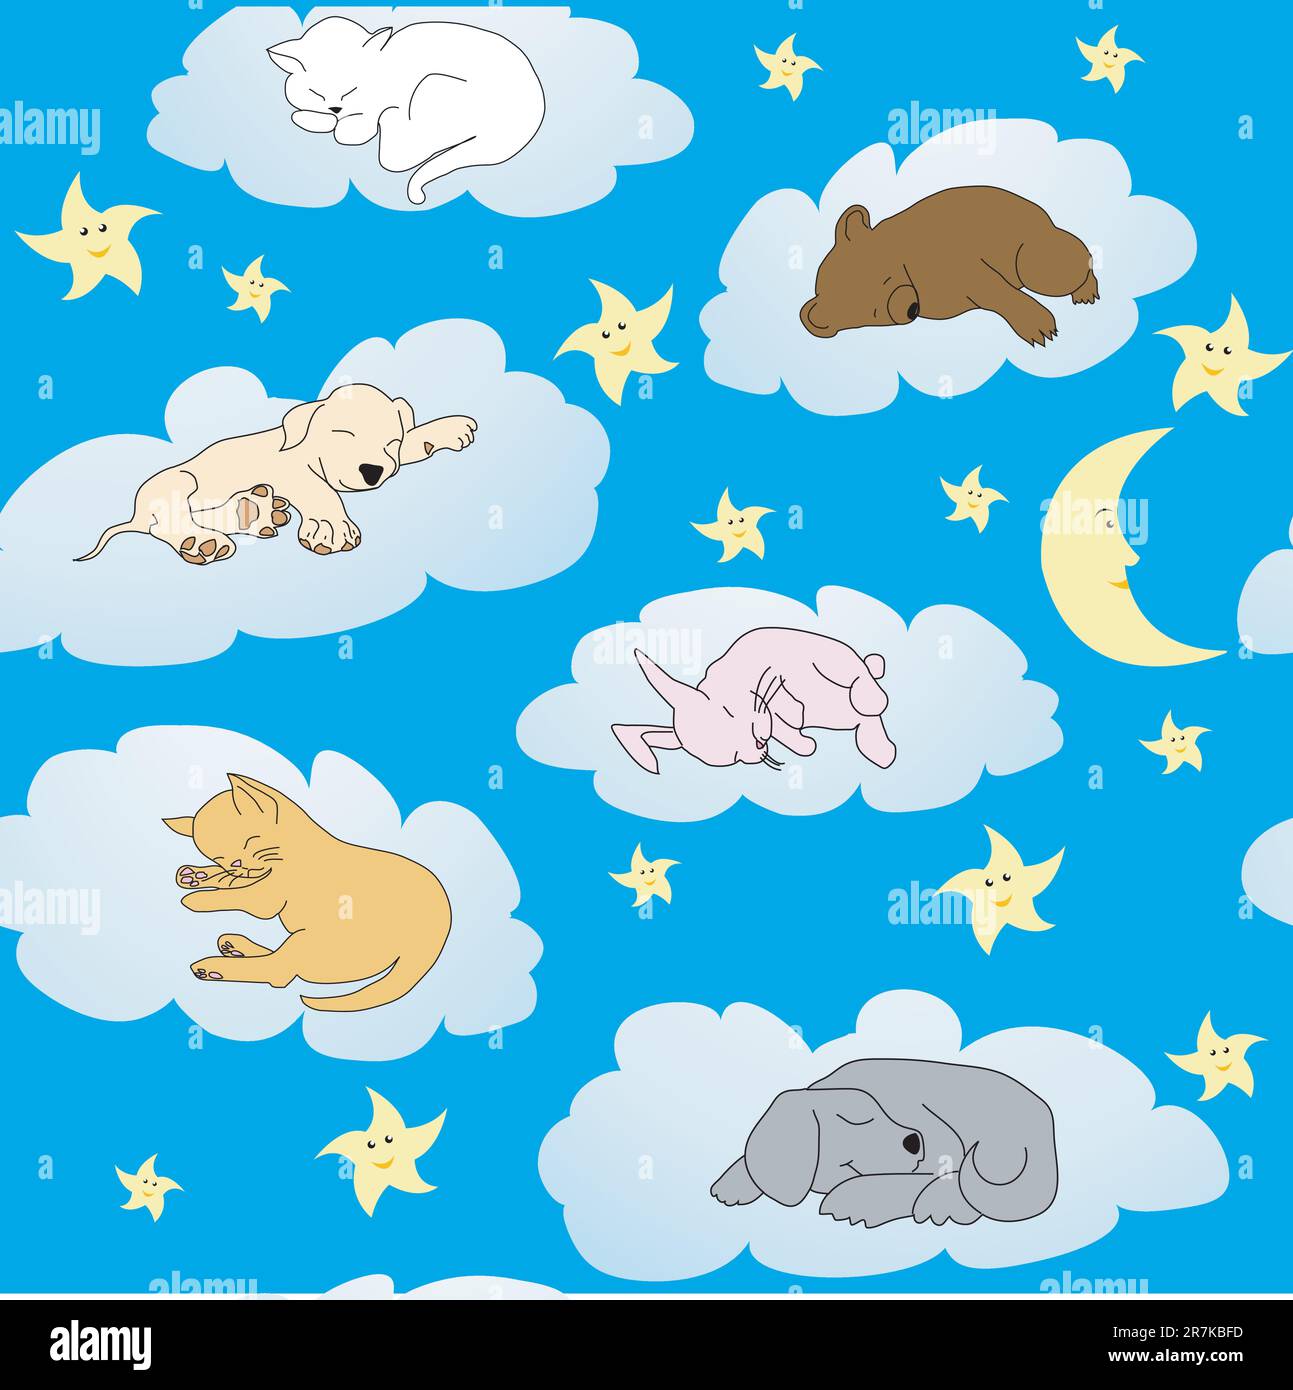 Background with cute doodle animals sleeping on clouds Stock Vector